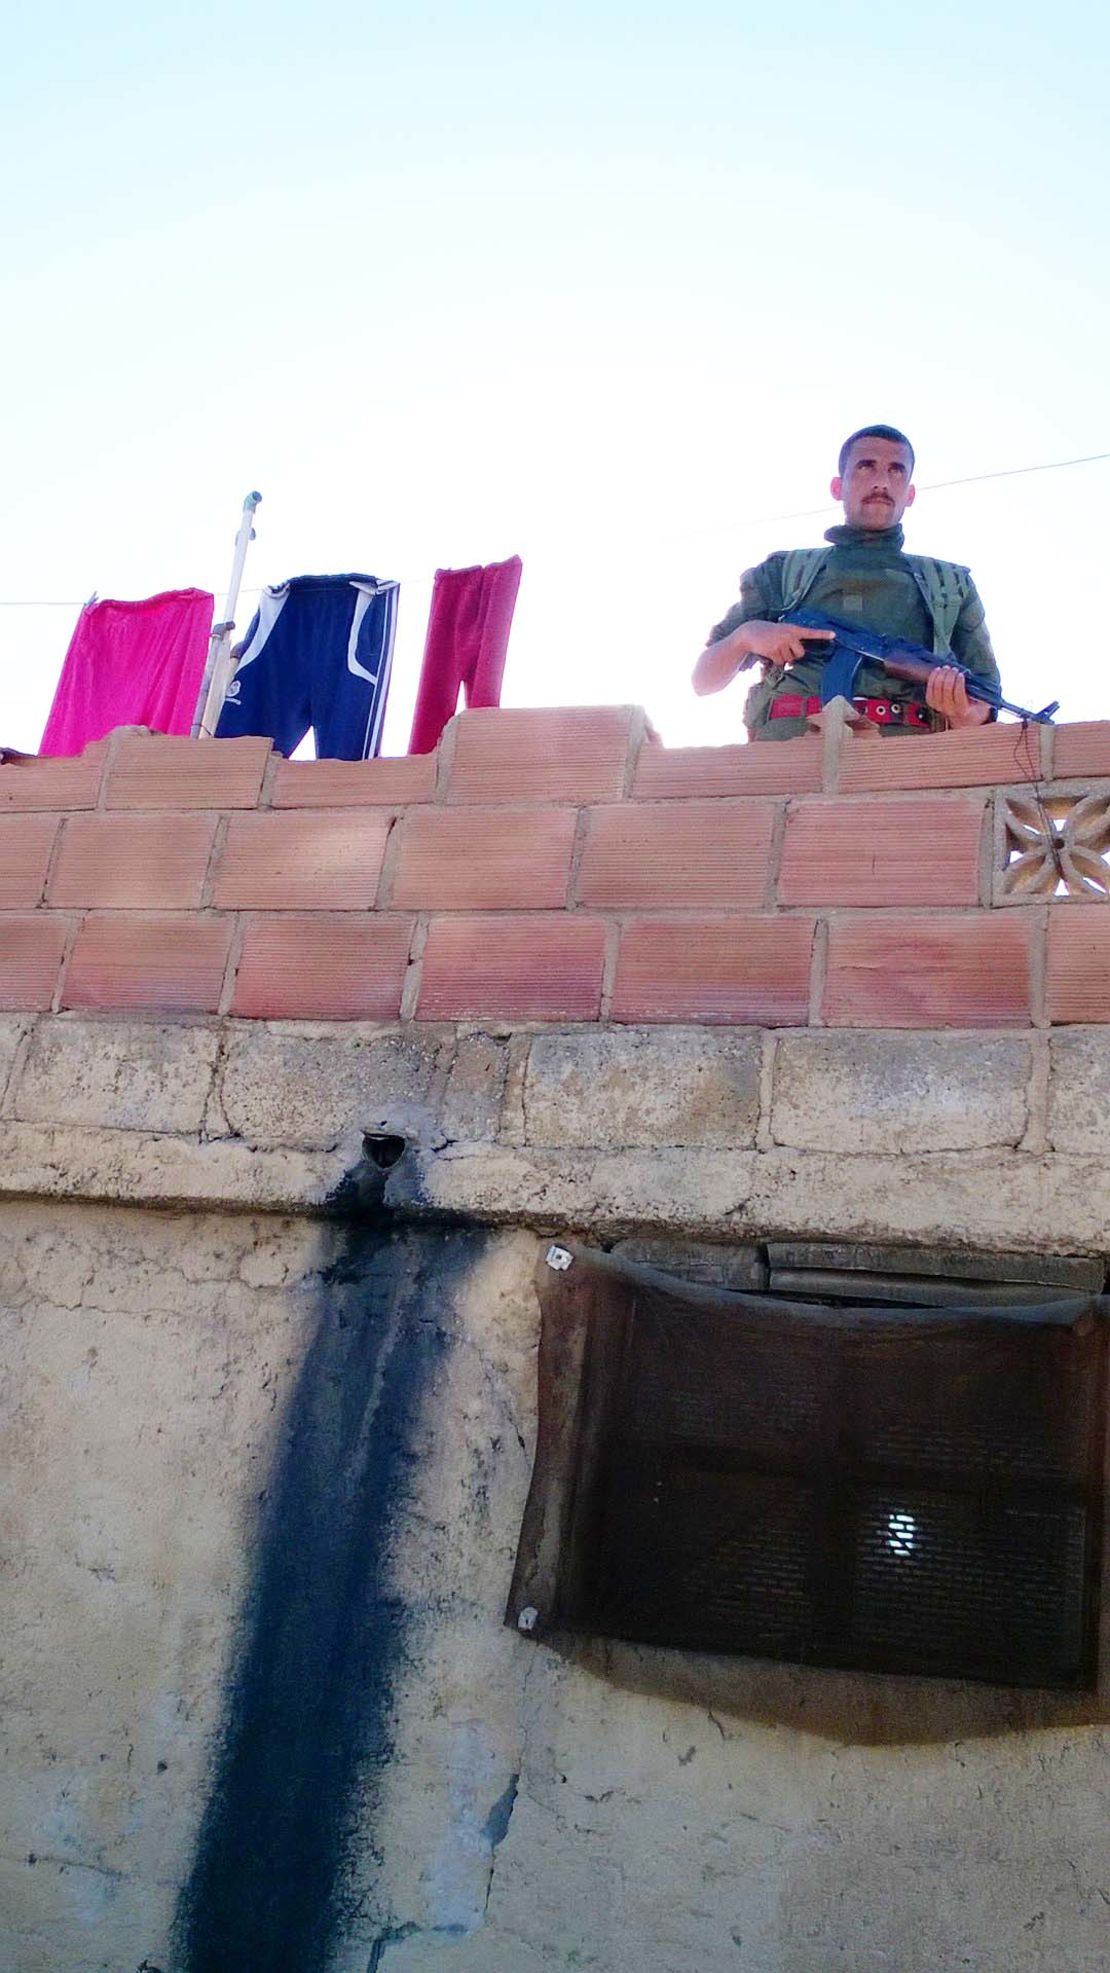 Life in the embattled community: A patrolling soldier stands next to a line of washing.